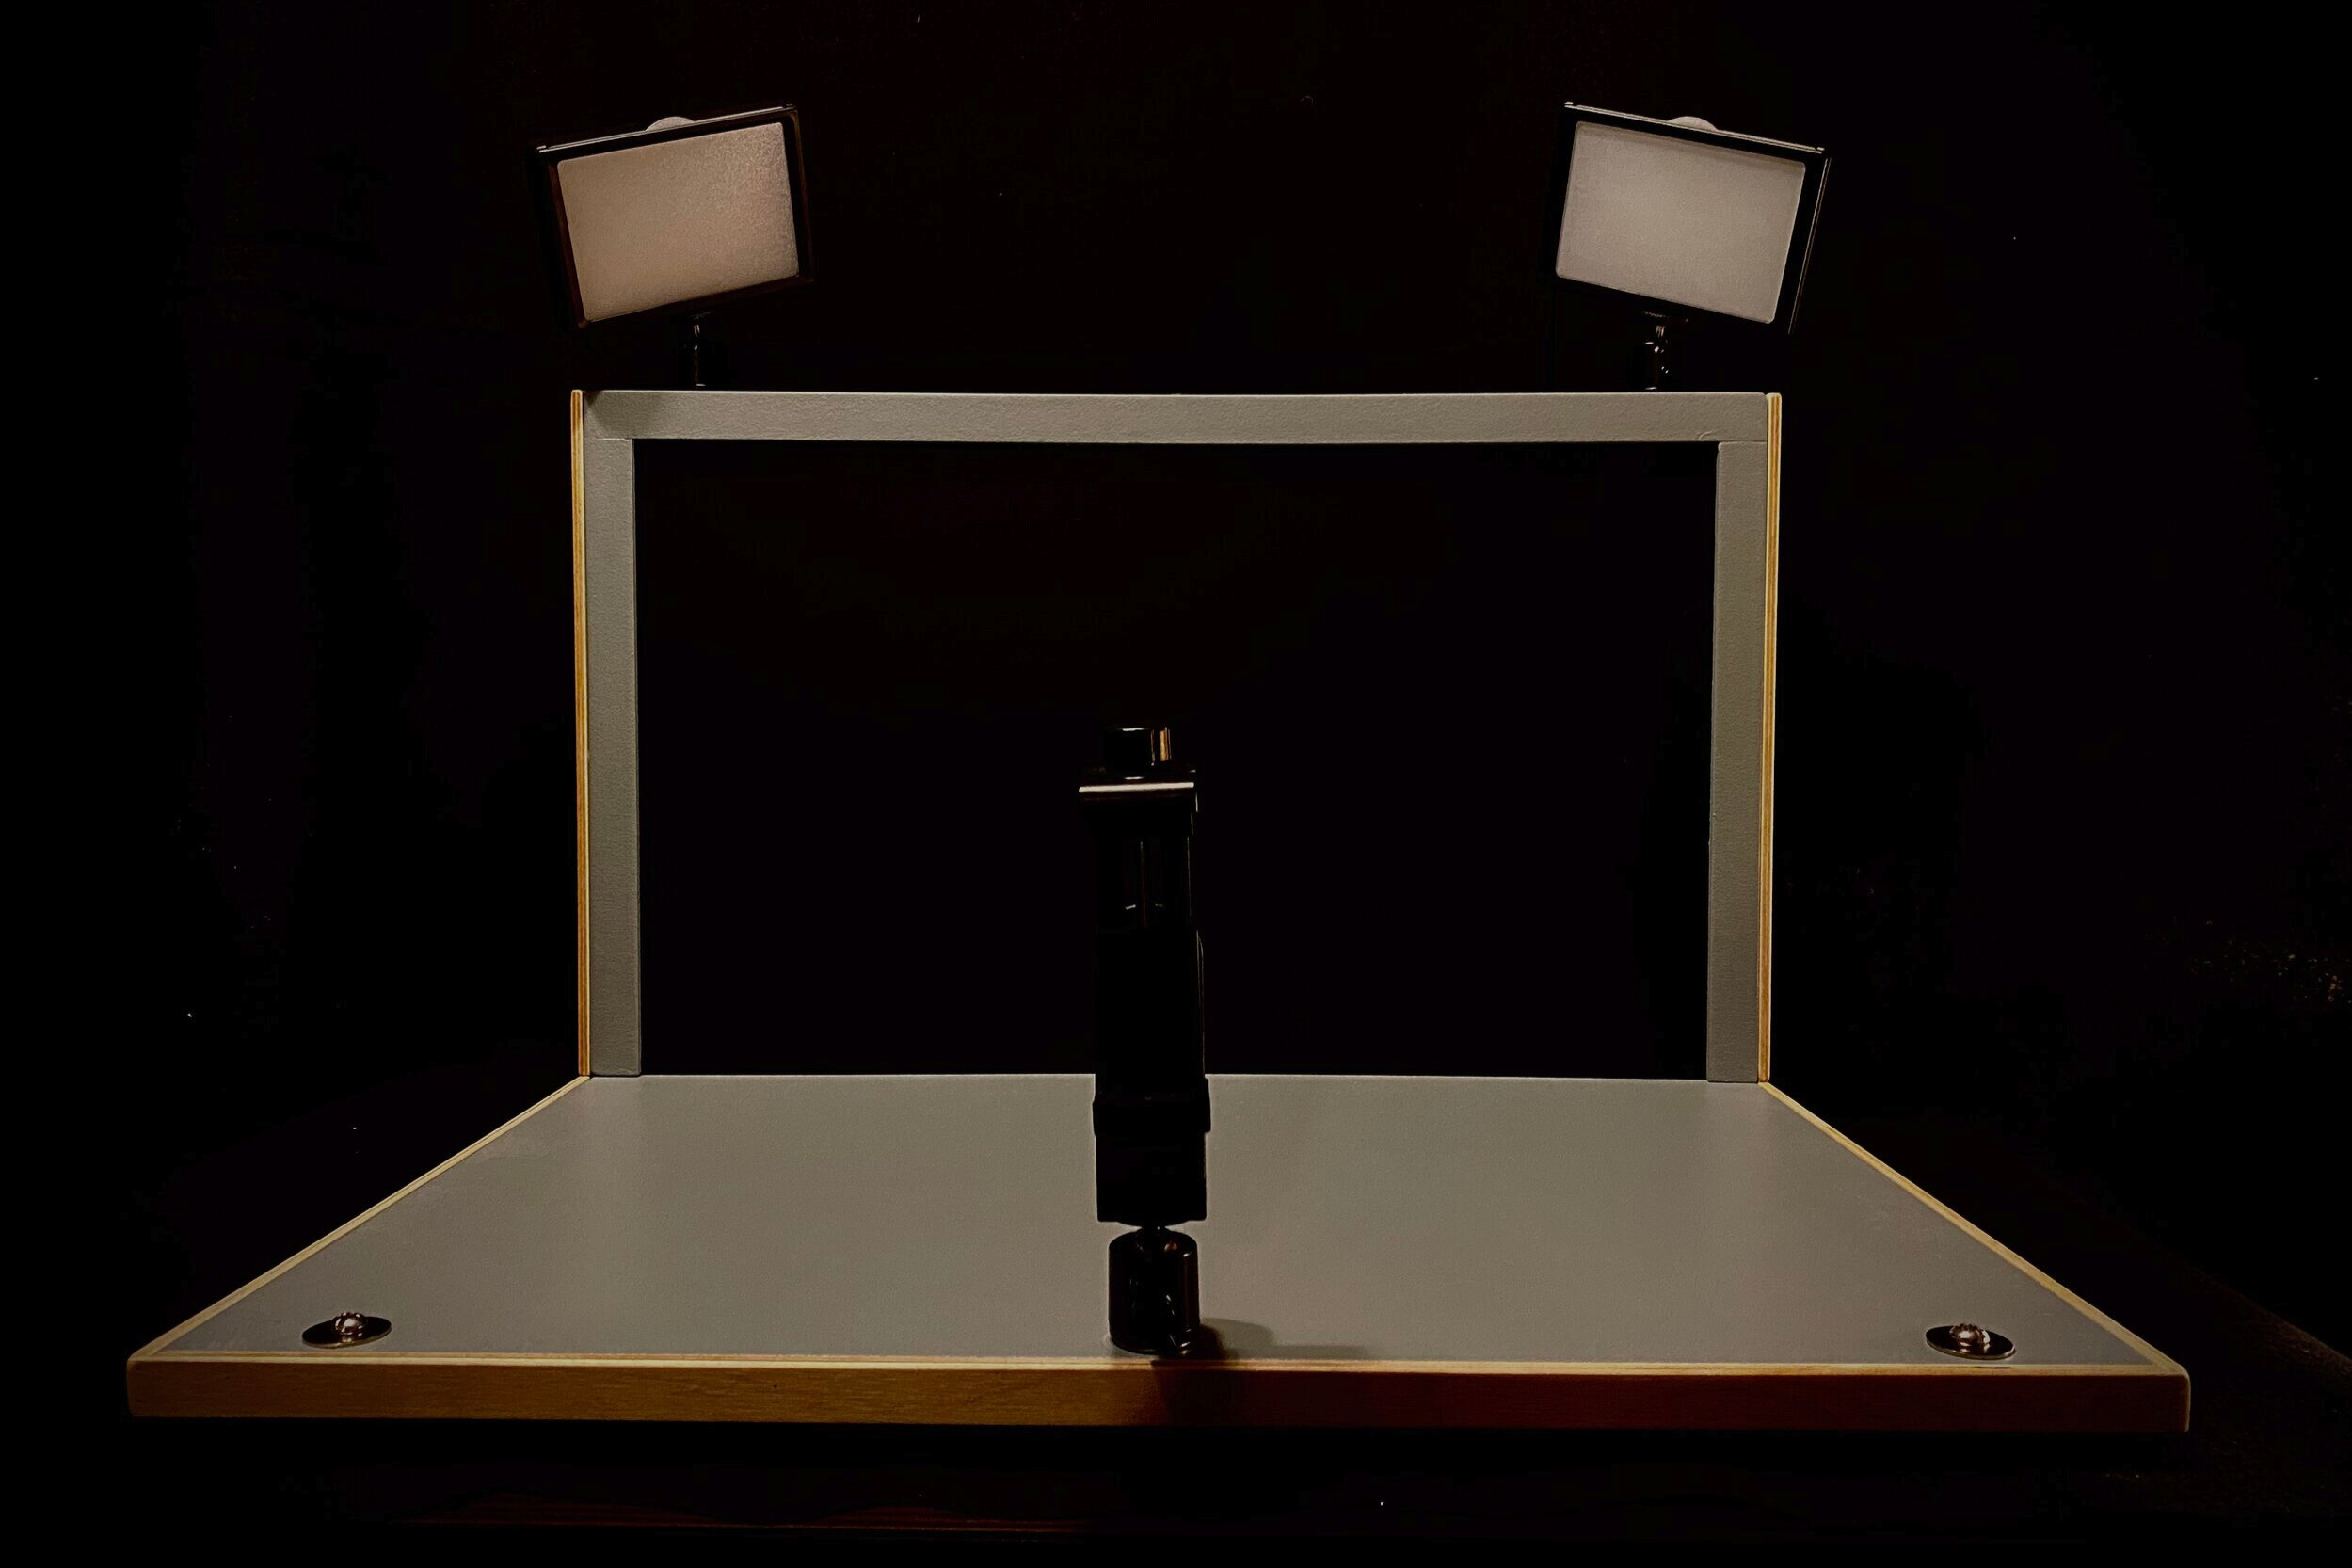 Getting Started with Stop Motion Animation: Equipment